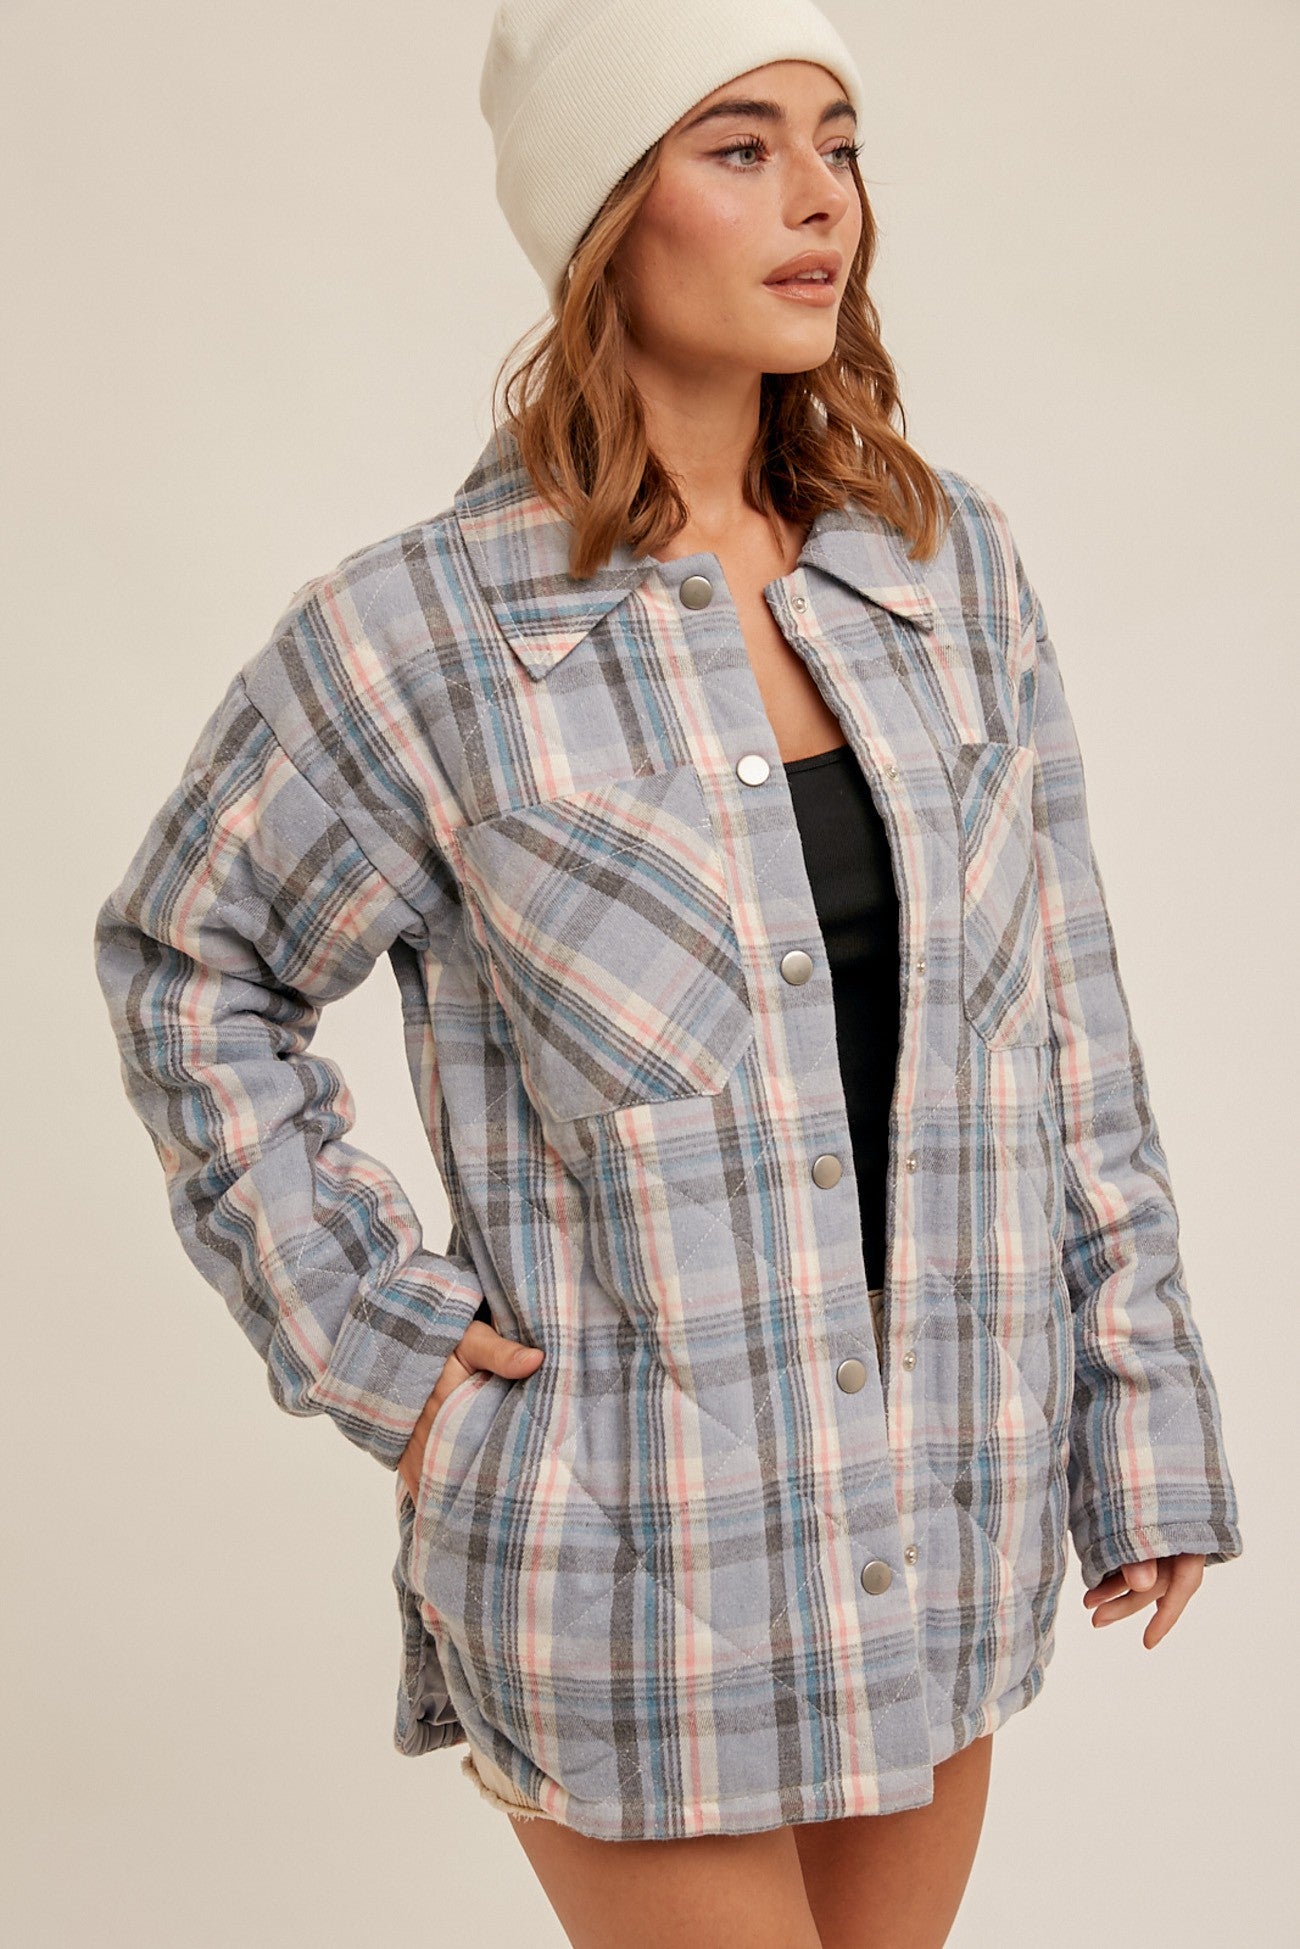 The Rancher Quilted Blue Plaid Snap Button Jacket - Lavender Hills BeautyHem & Thread35232